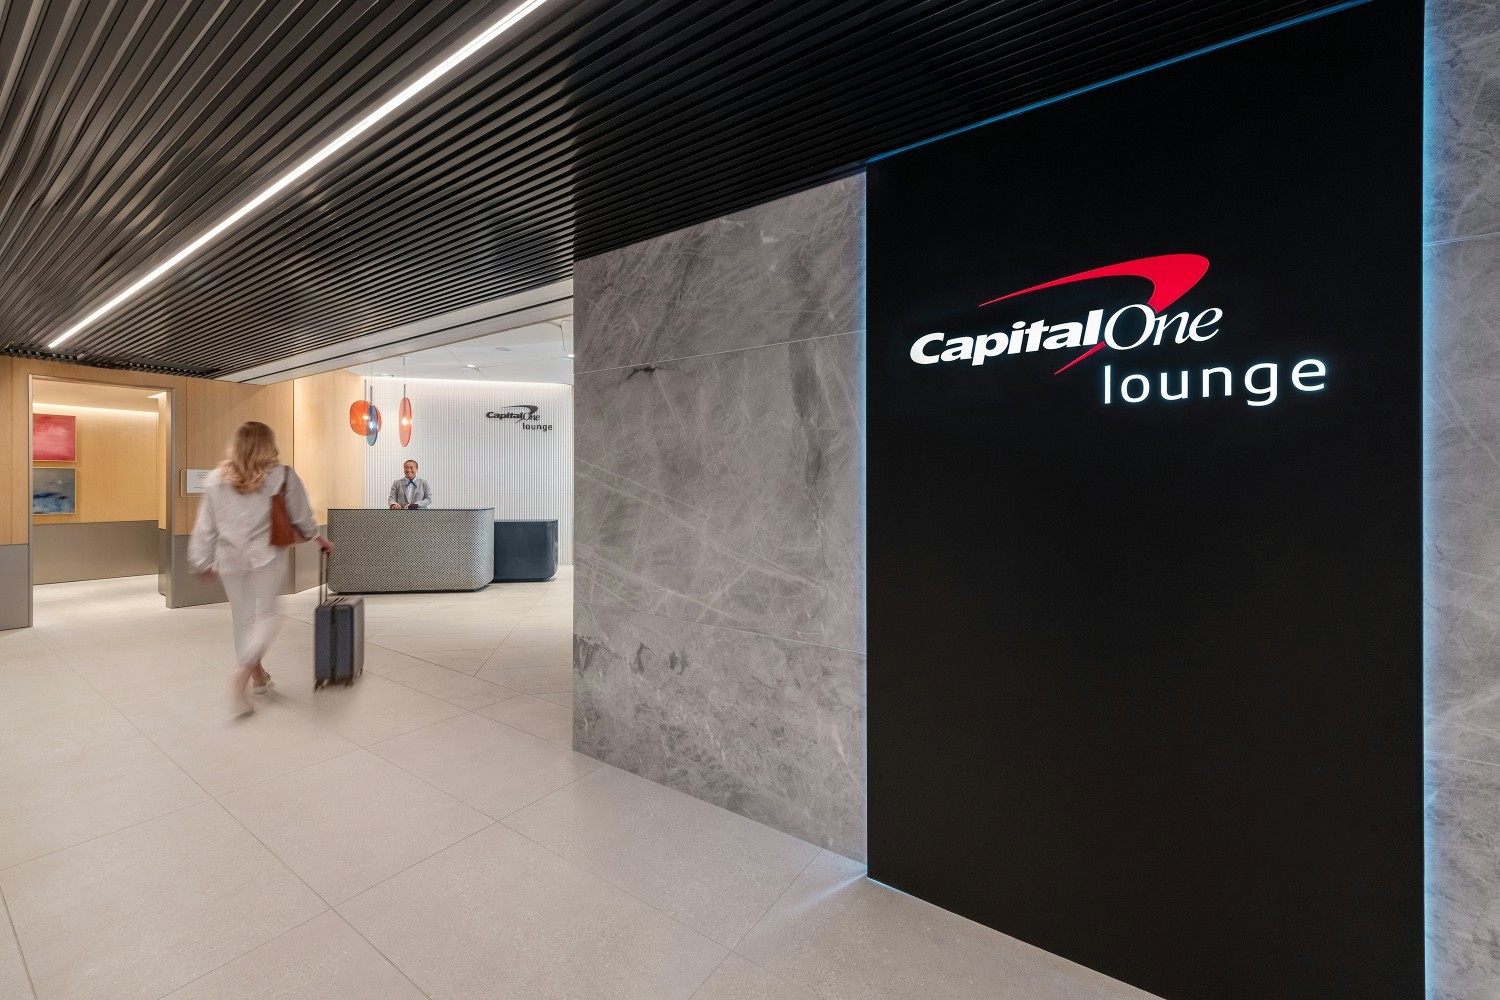 Capital One Lounges offer a fresh take on the traditional airport lounge